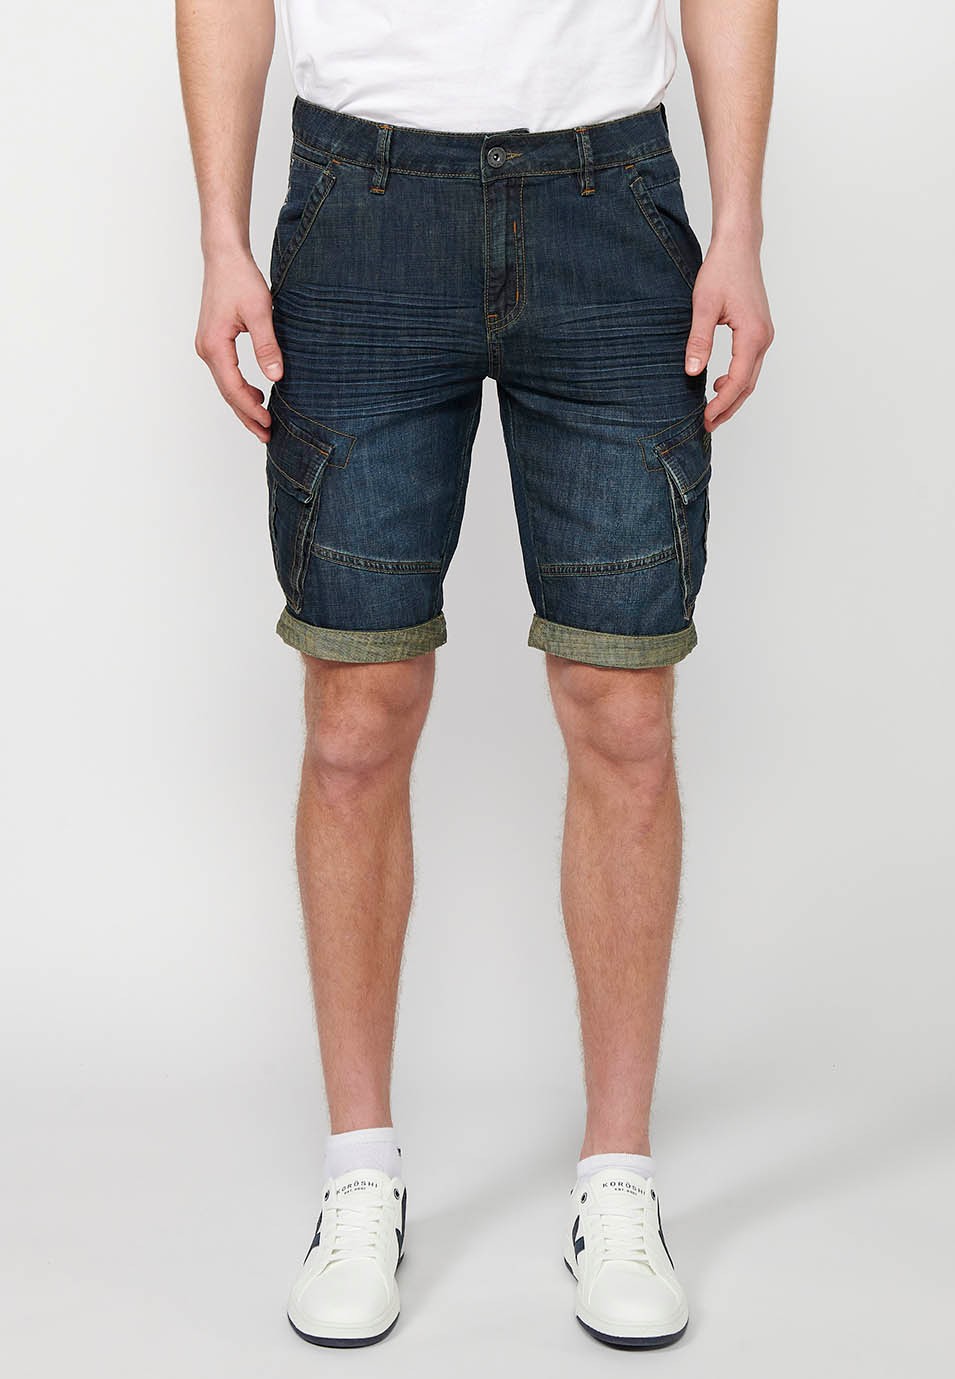 Blue Denim Bermuda Shorts with Side Cargo Pockets and Front Closure with Zipper and Button for Men 5